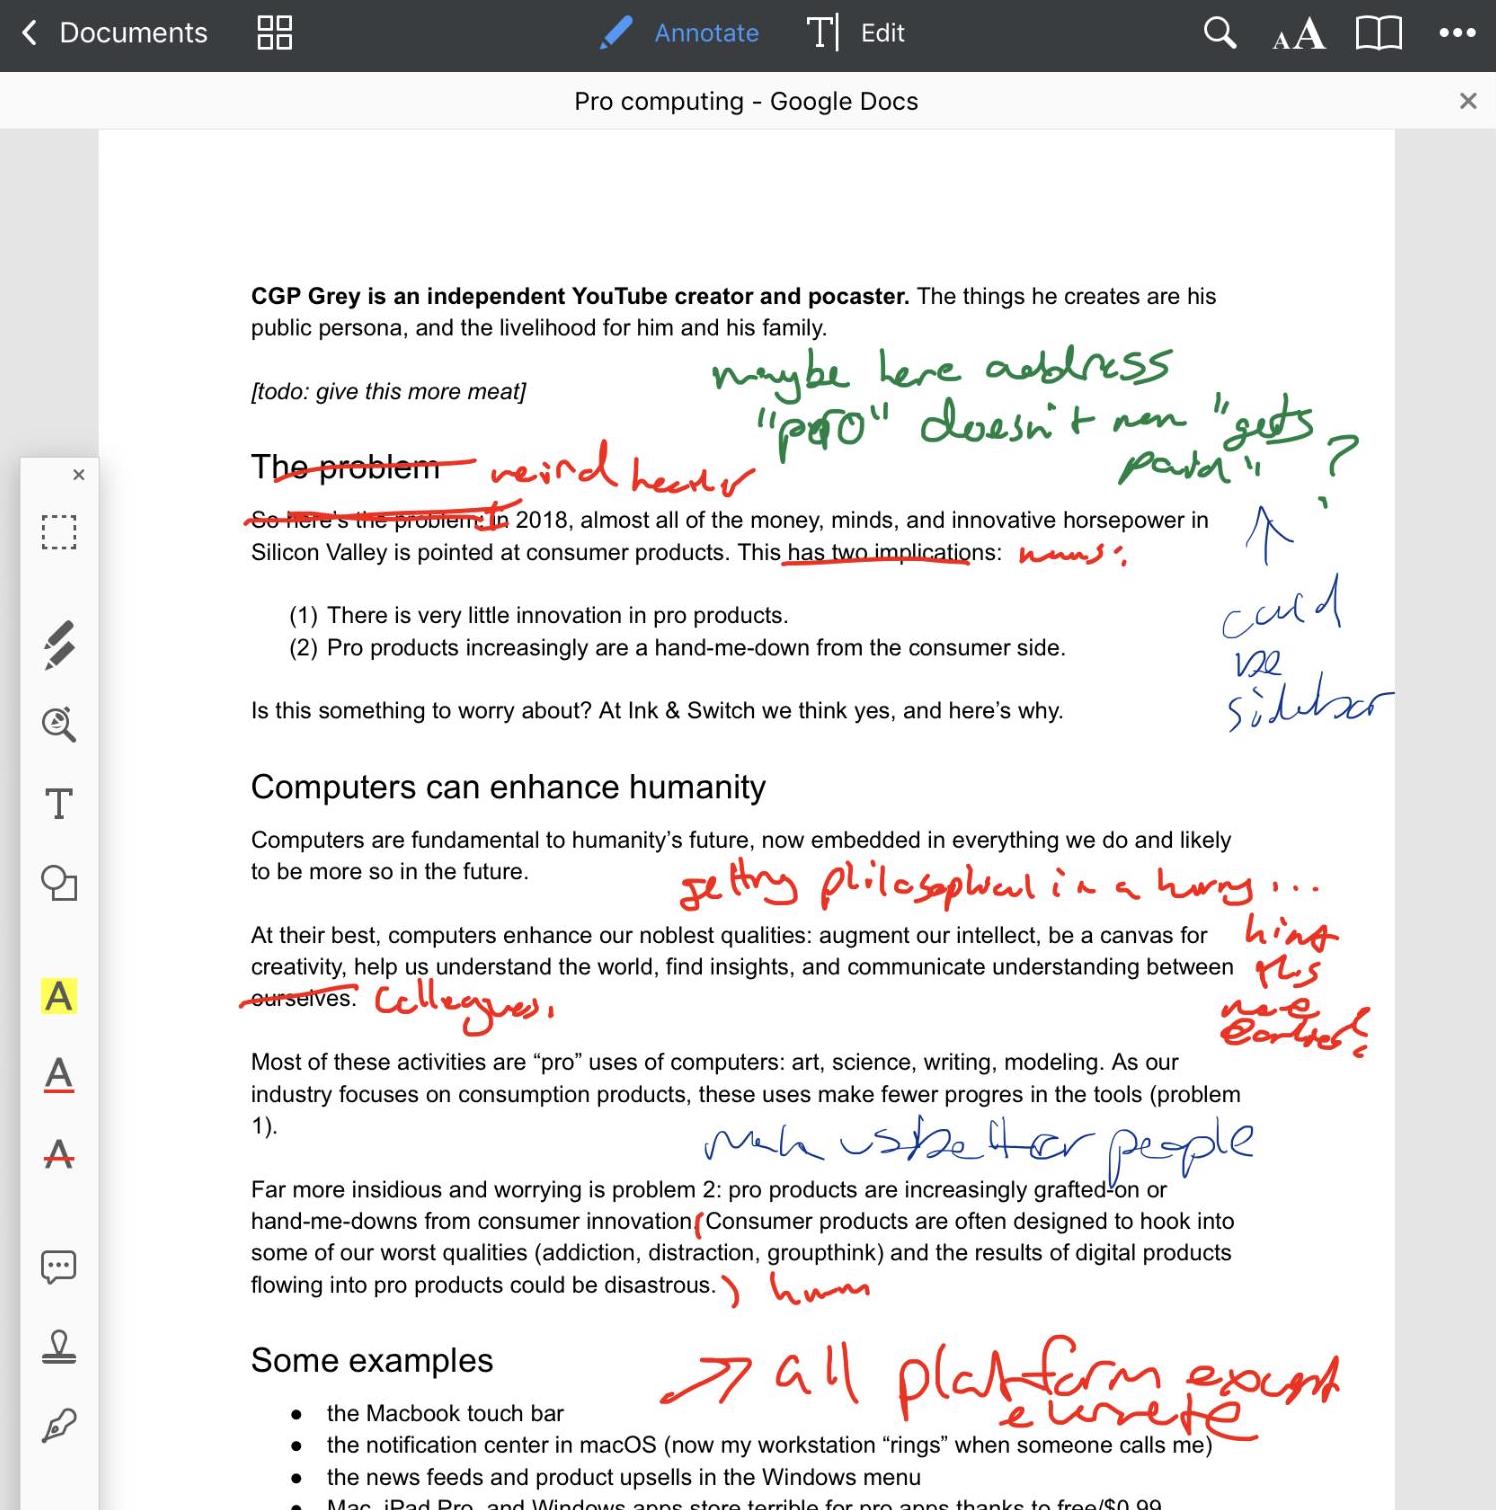 Excerpt from the author’s personal annotations in PDFExpert.